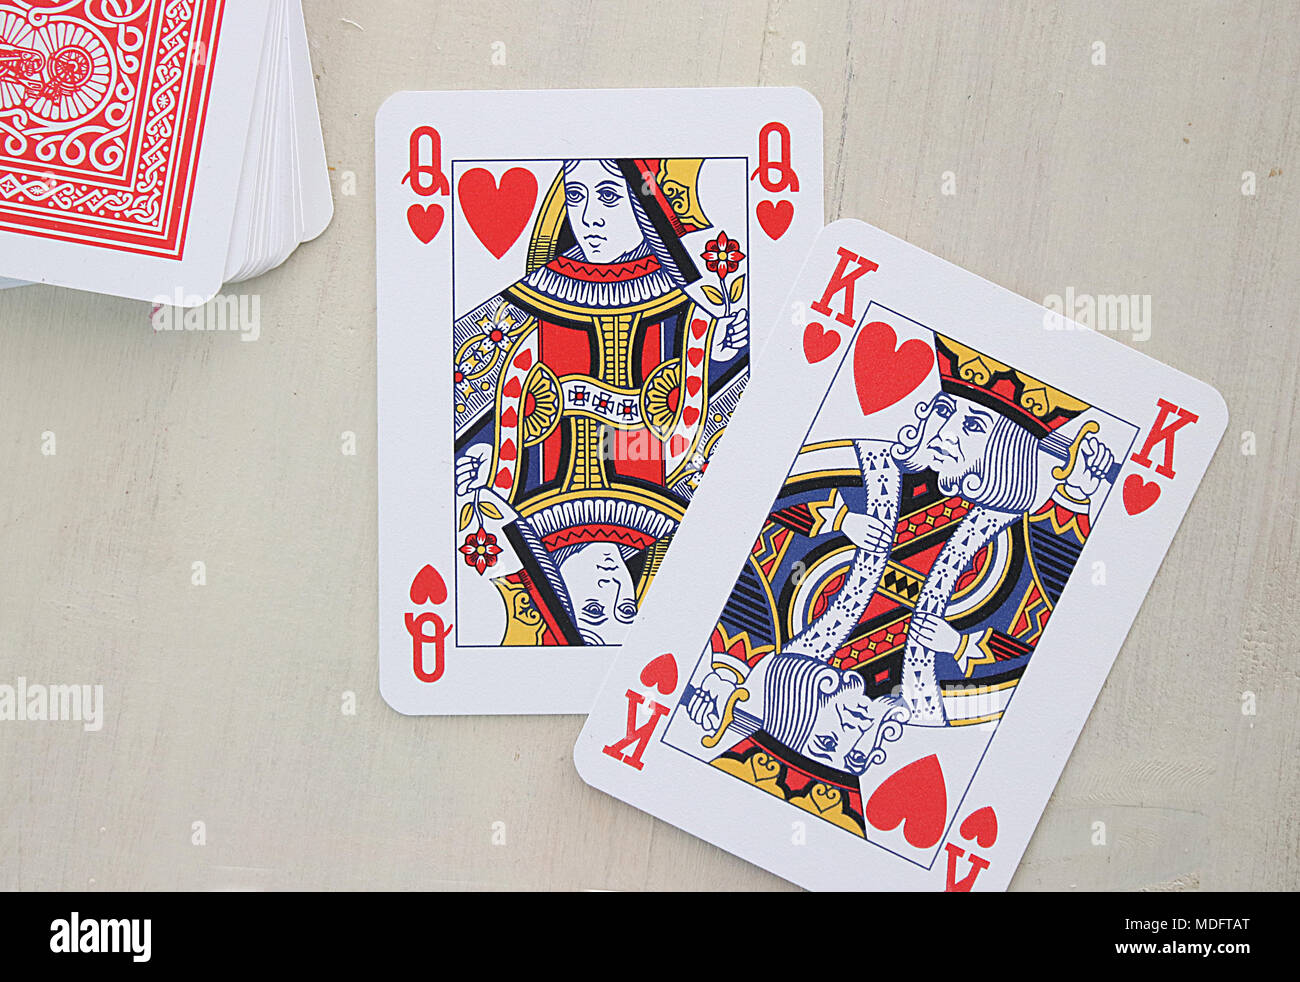 King and queen of hearts and a stack of playing cards Stock Photo